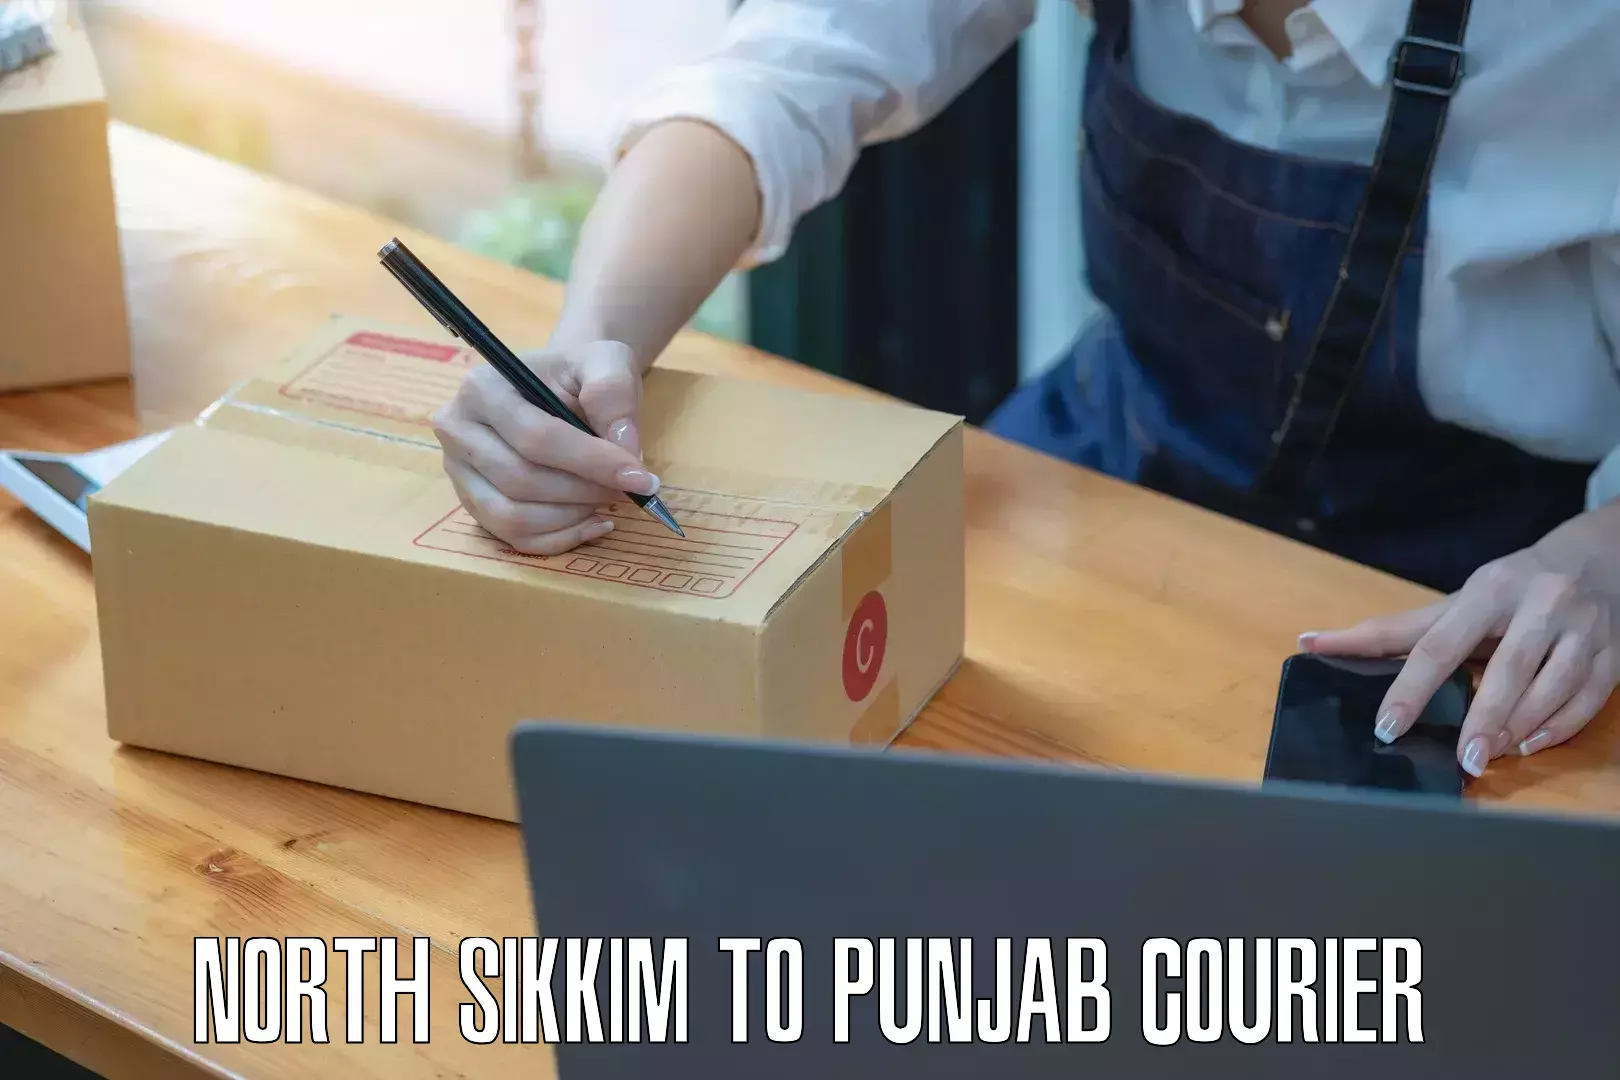 Bulk courier orders North Sikkim to Bathinda